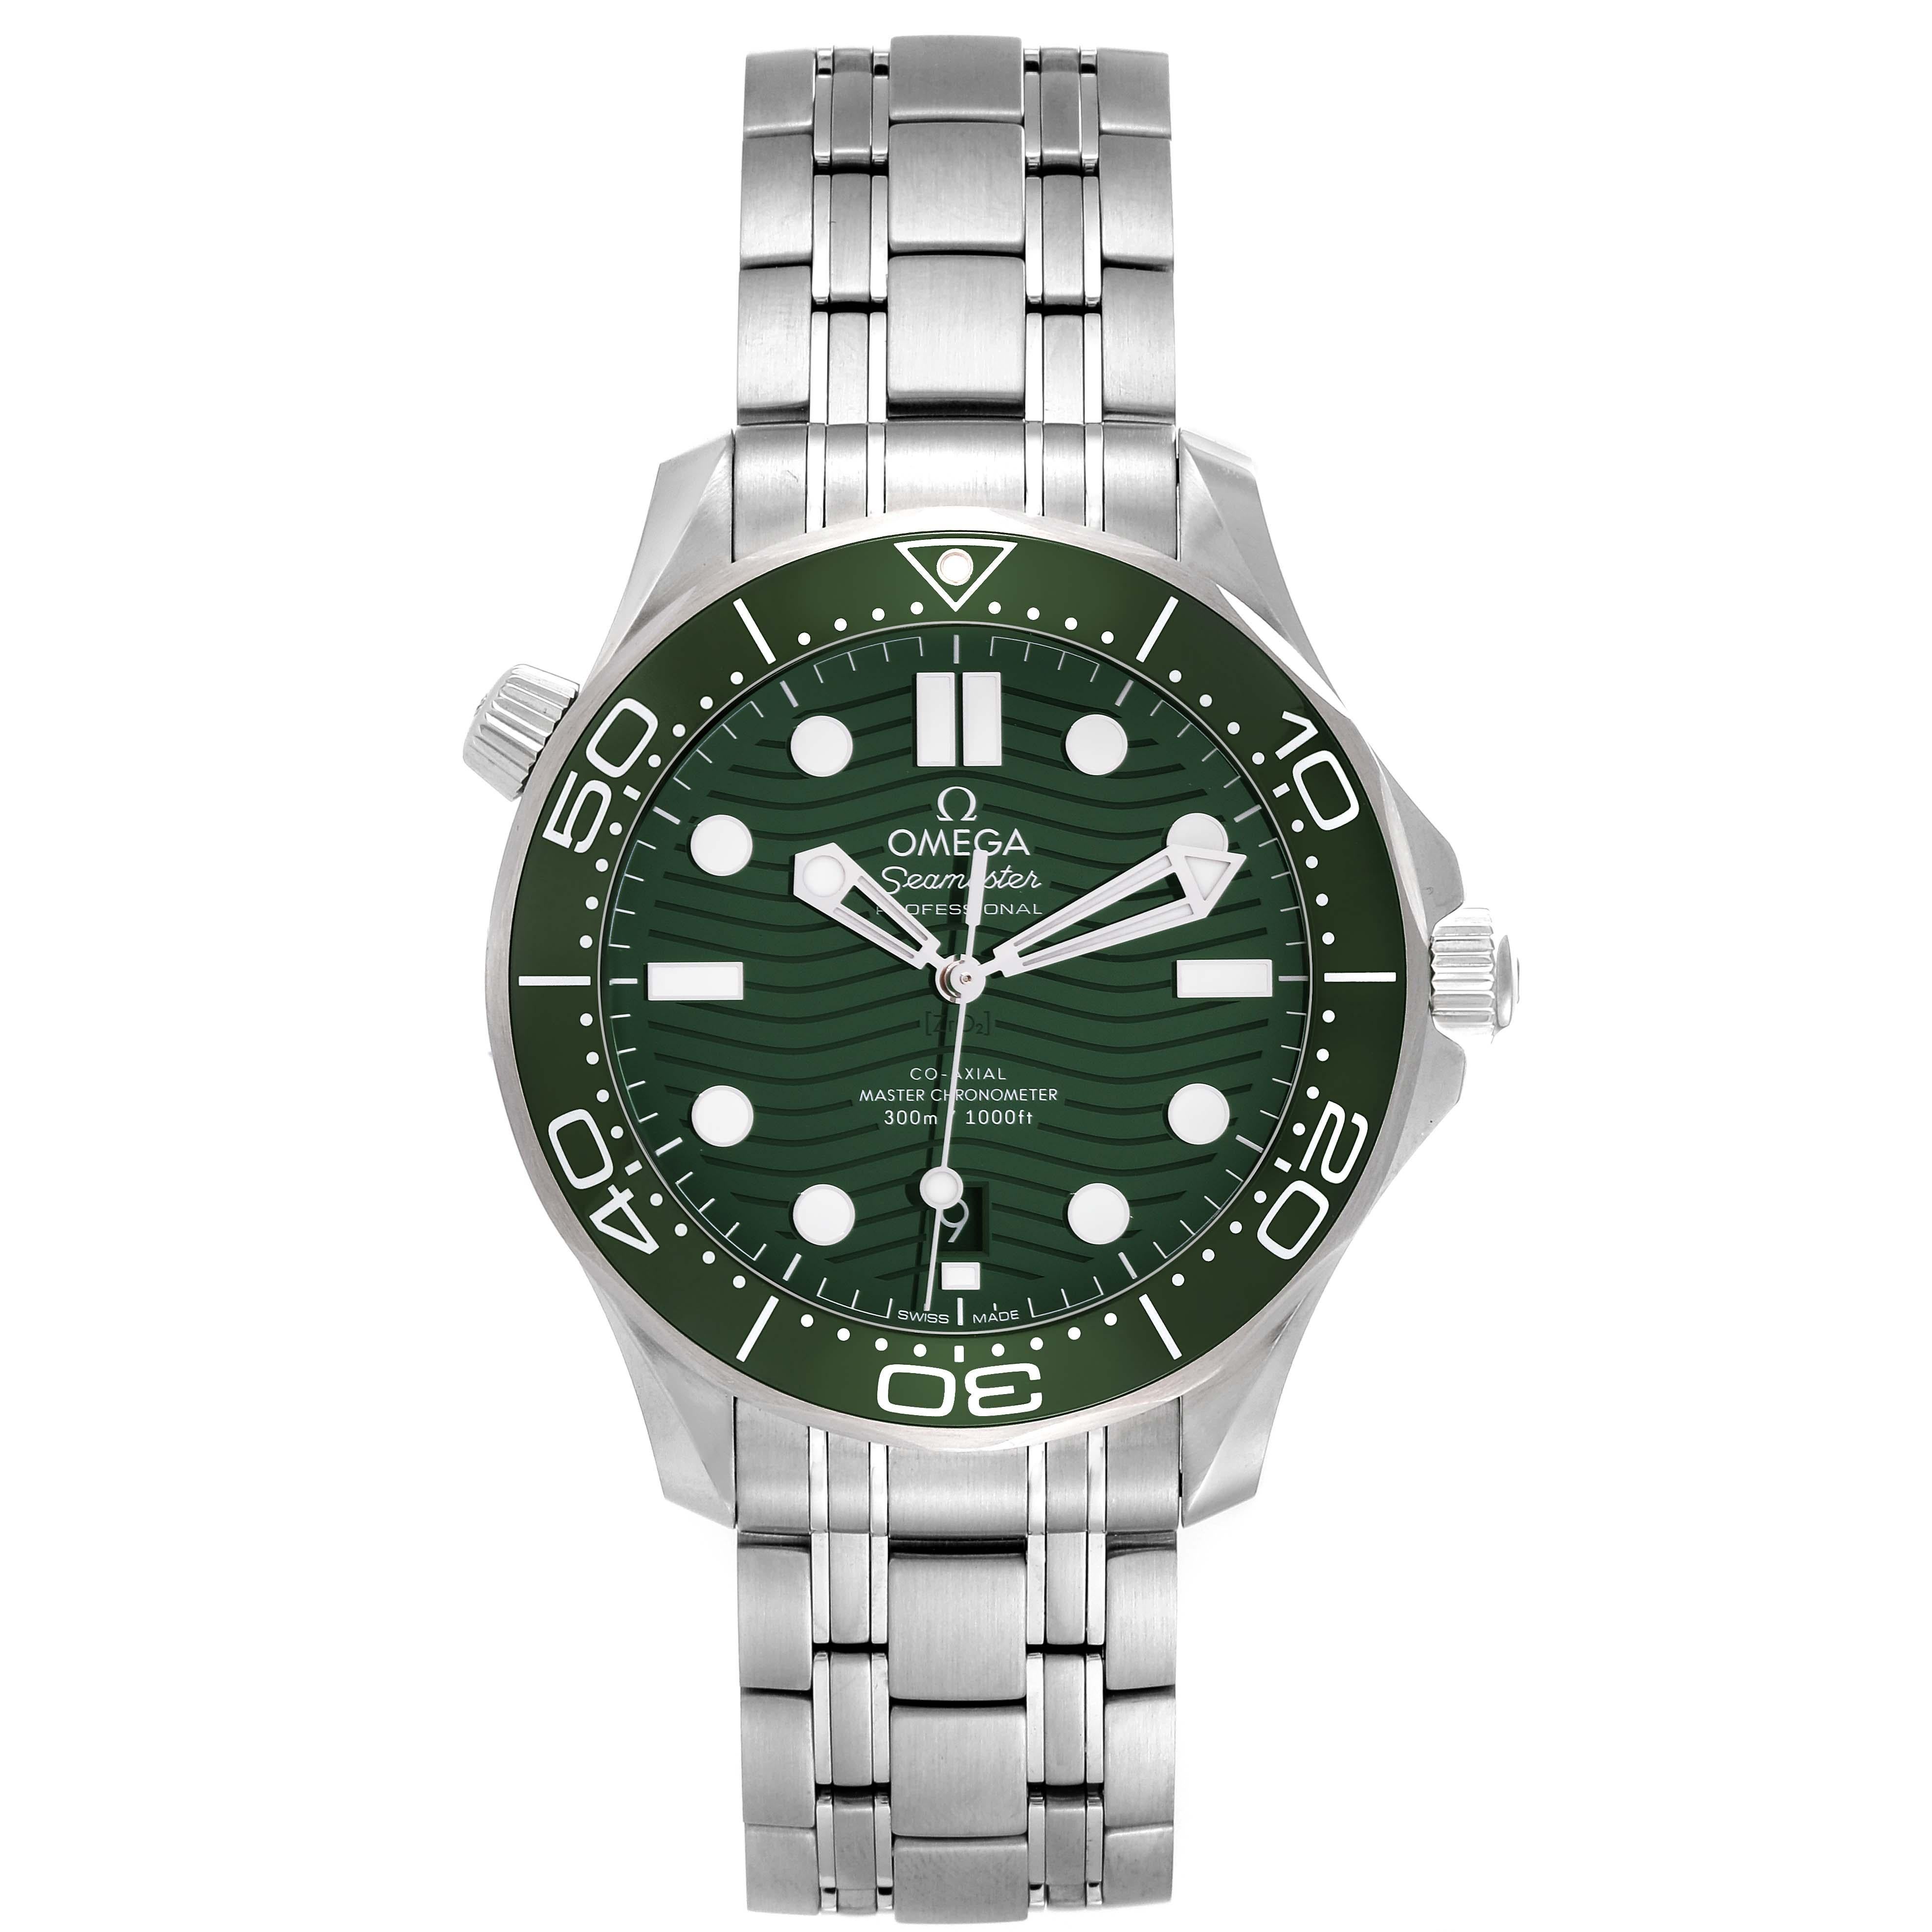 Omega Seamaster Diver Green Dial Steel Mens Watch 210.30.42.20.10.001 Unworn For Sale 1